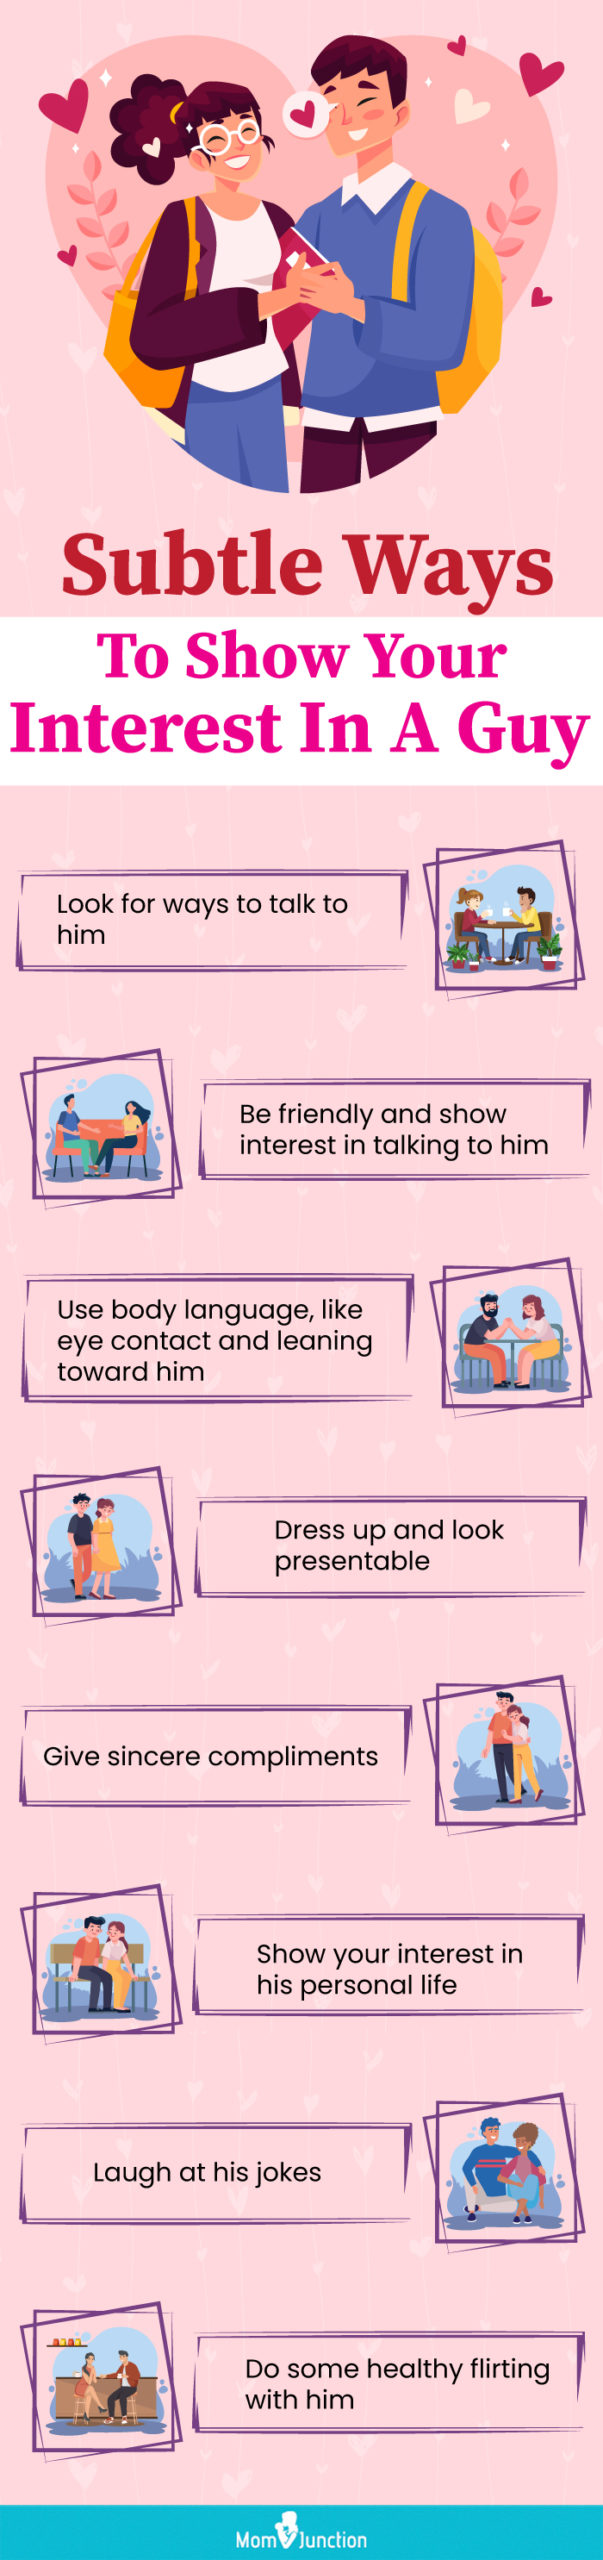 subtle ways to show your interest in a guy(infographic)